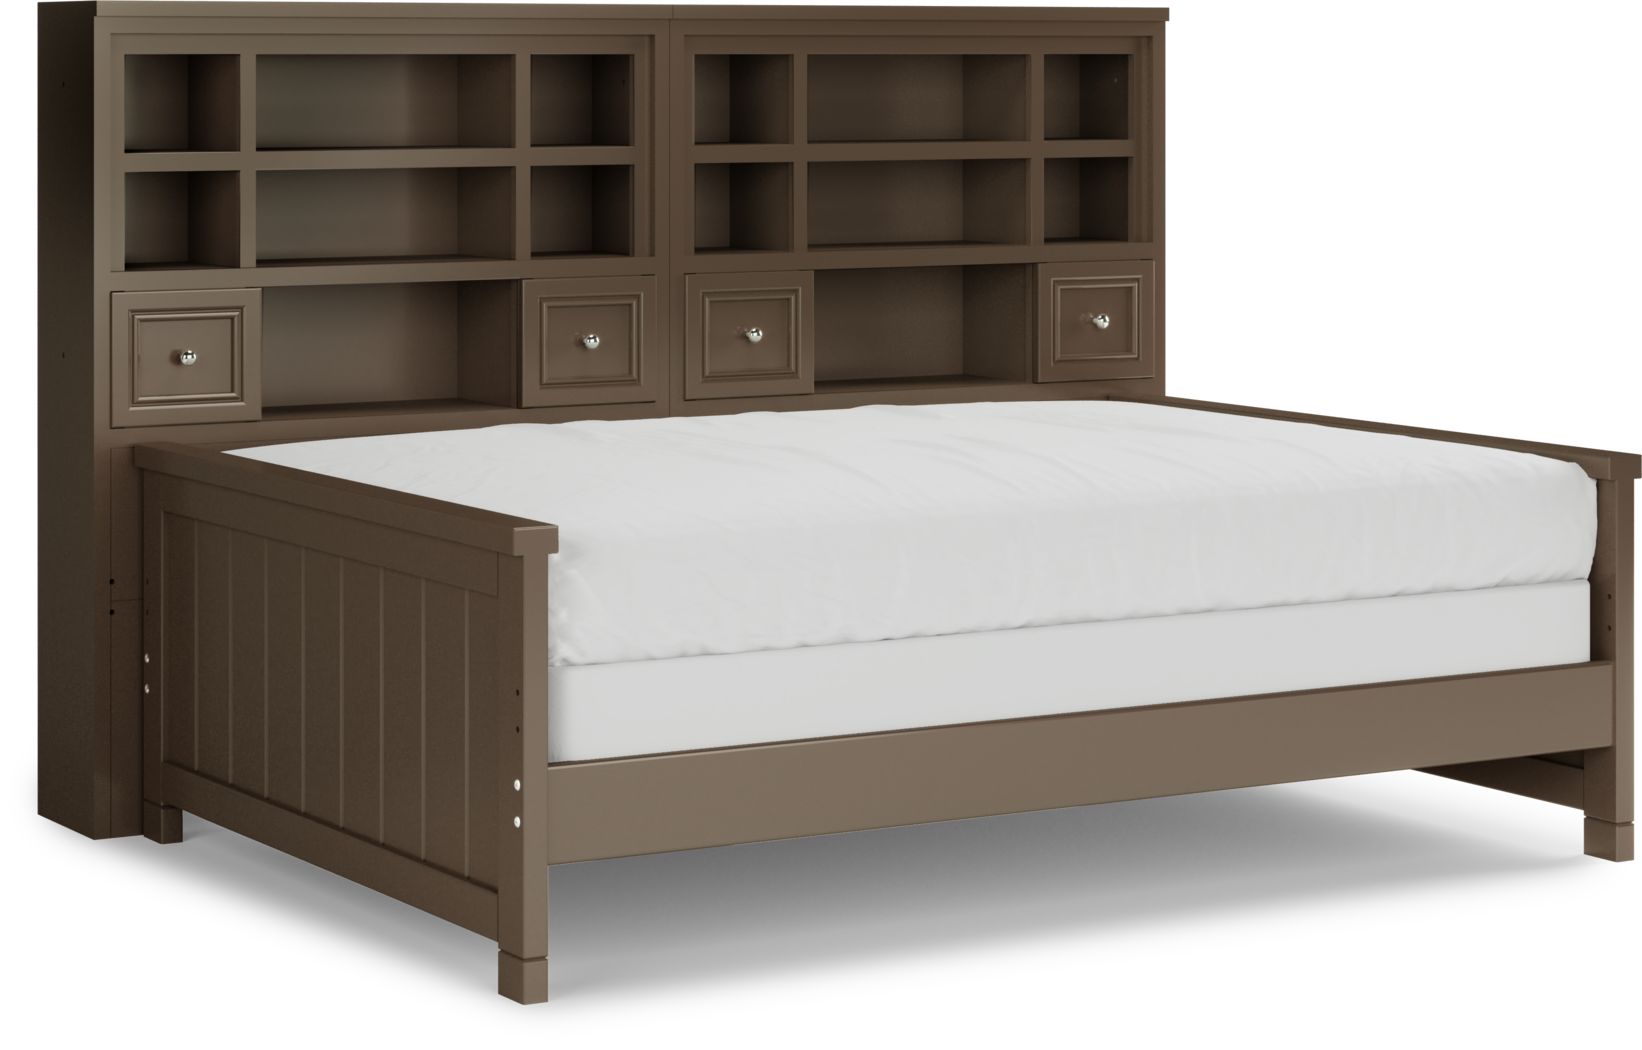 Bookcase Daybeds Full Twin With Trundle, Full Size Daybed With Bookcase Headboard